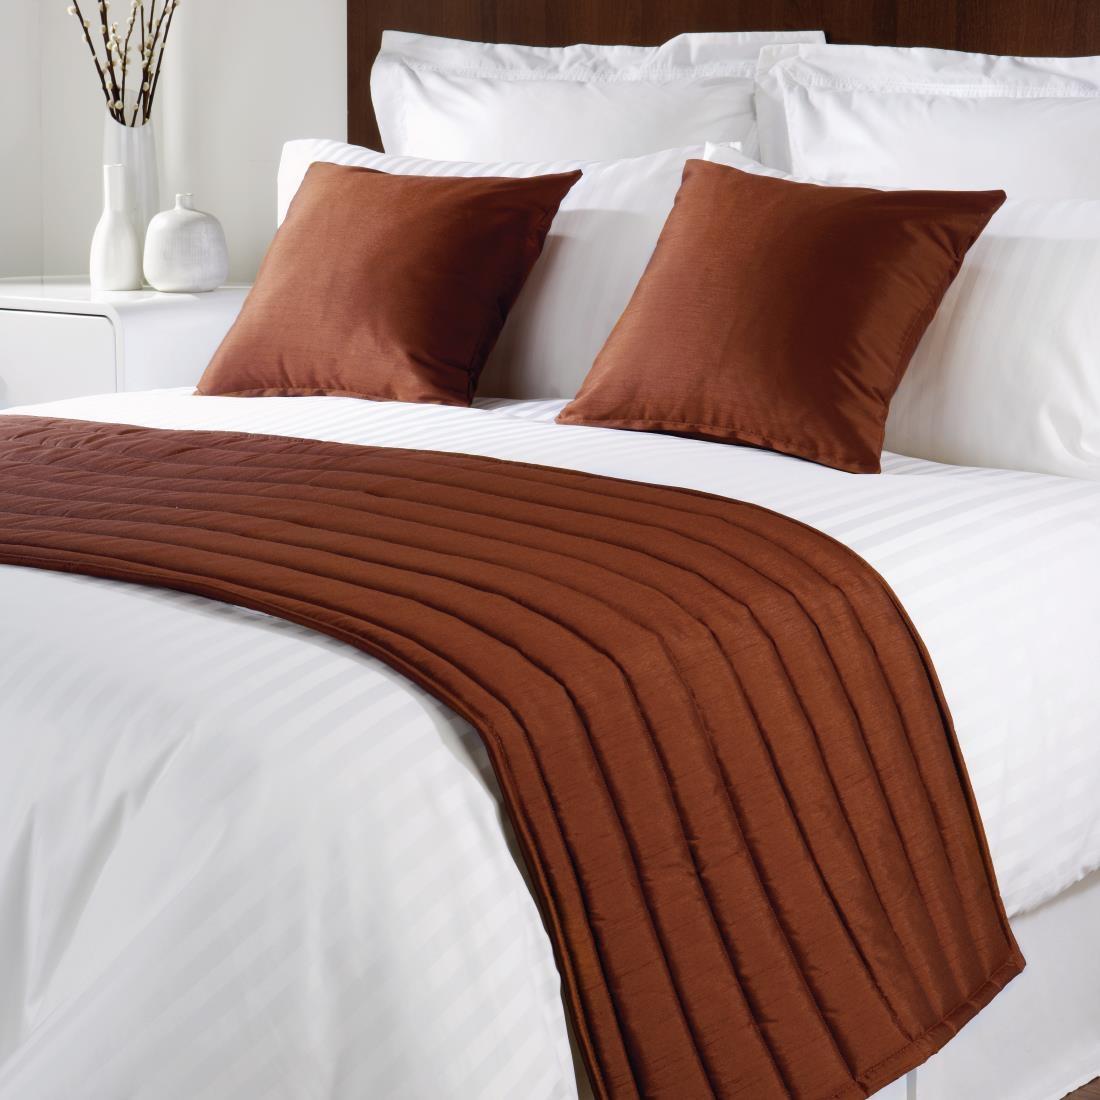 Mitre Comfort Simplicity Chocolate Bed Runner King Size - GU965  - 1